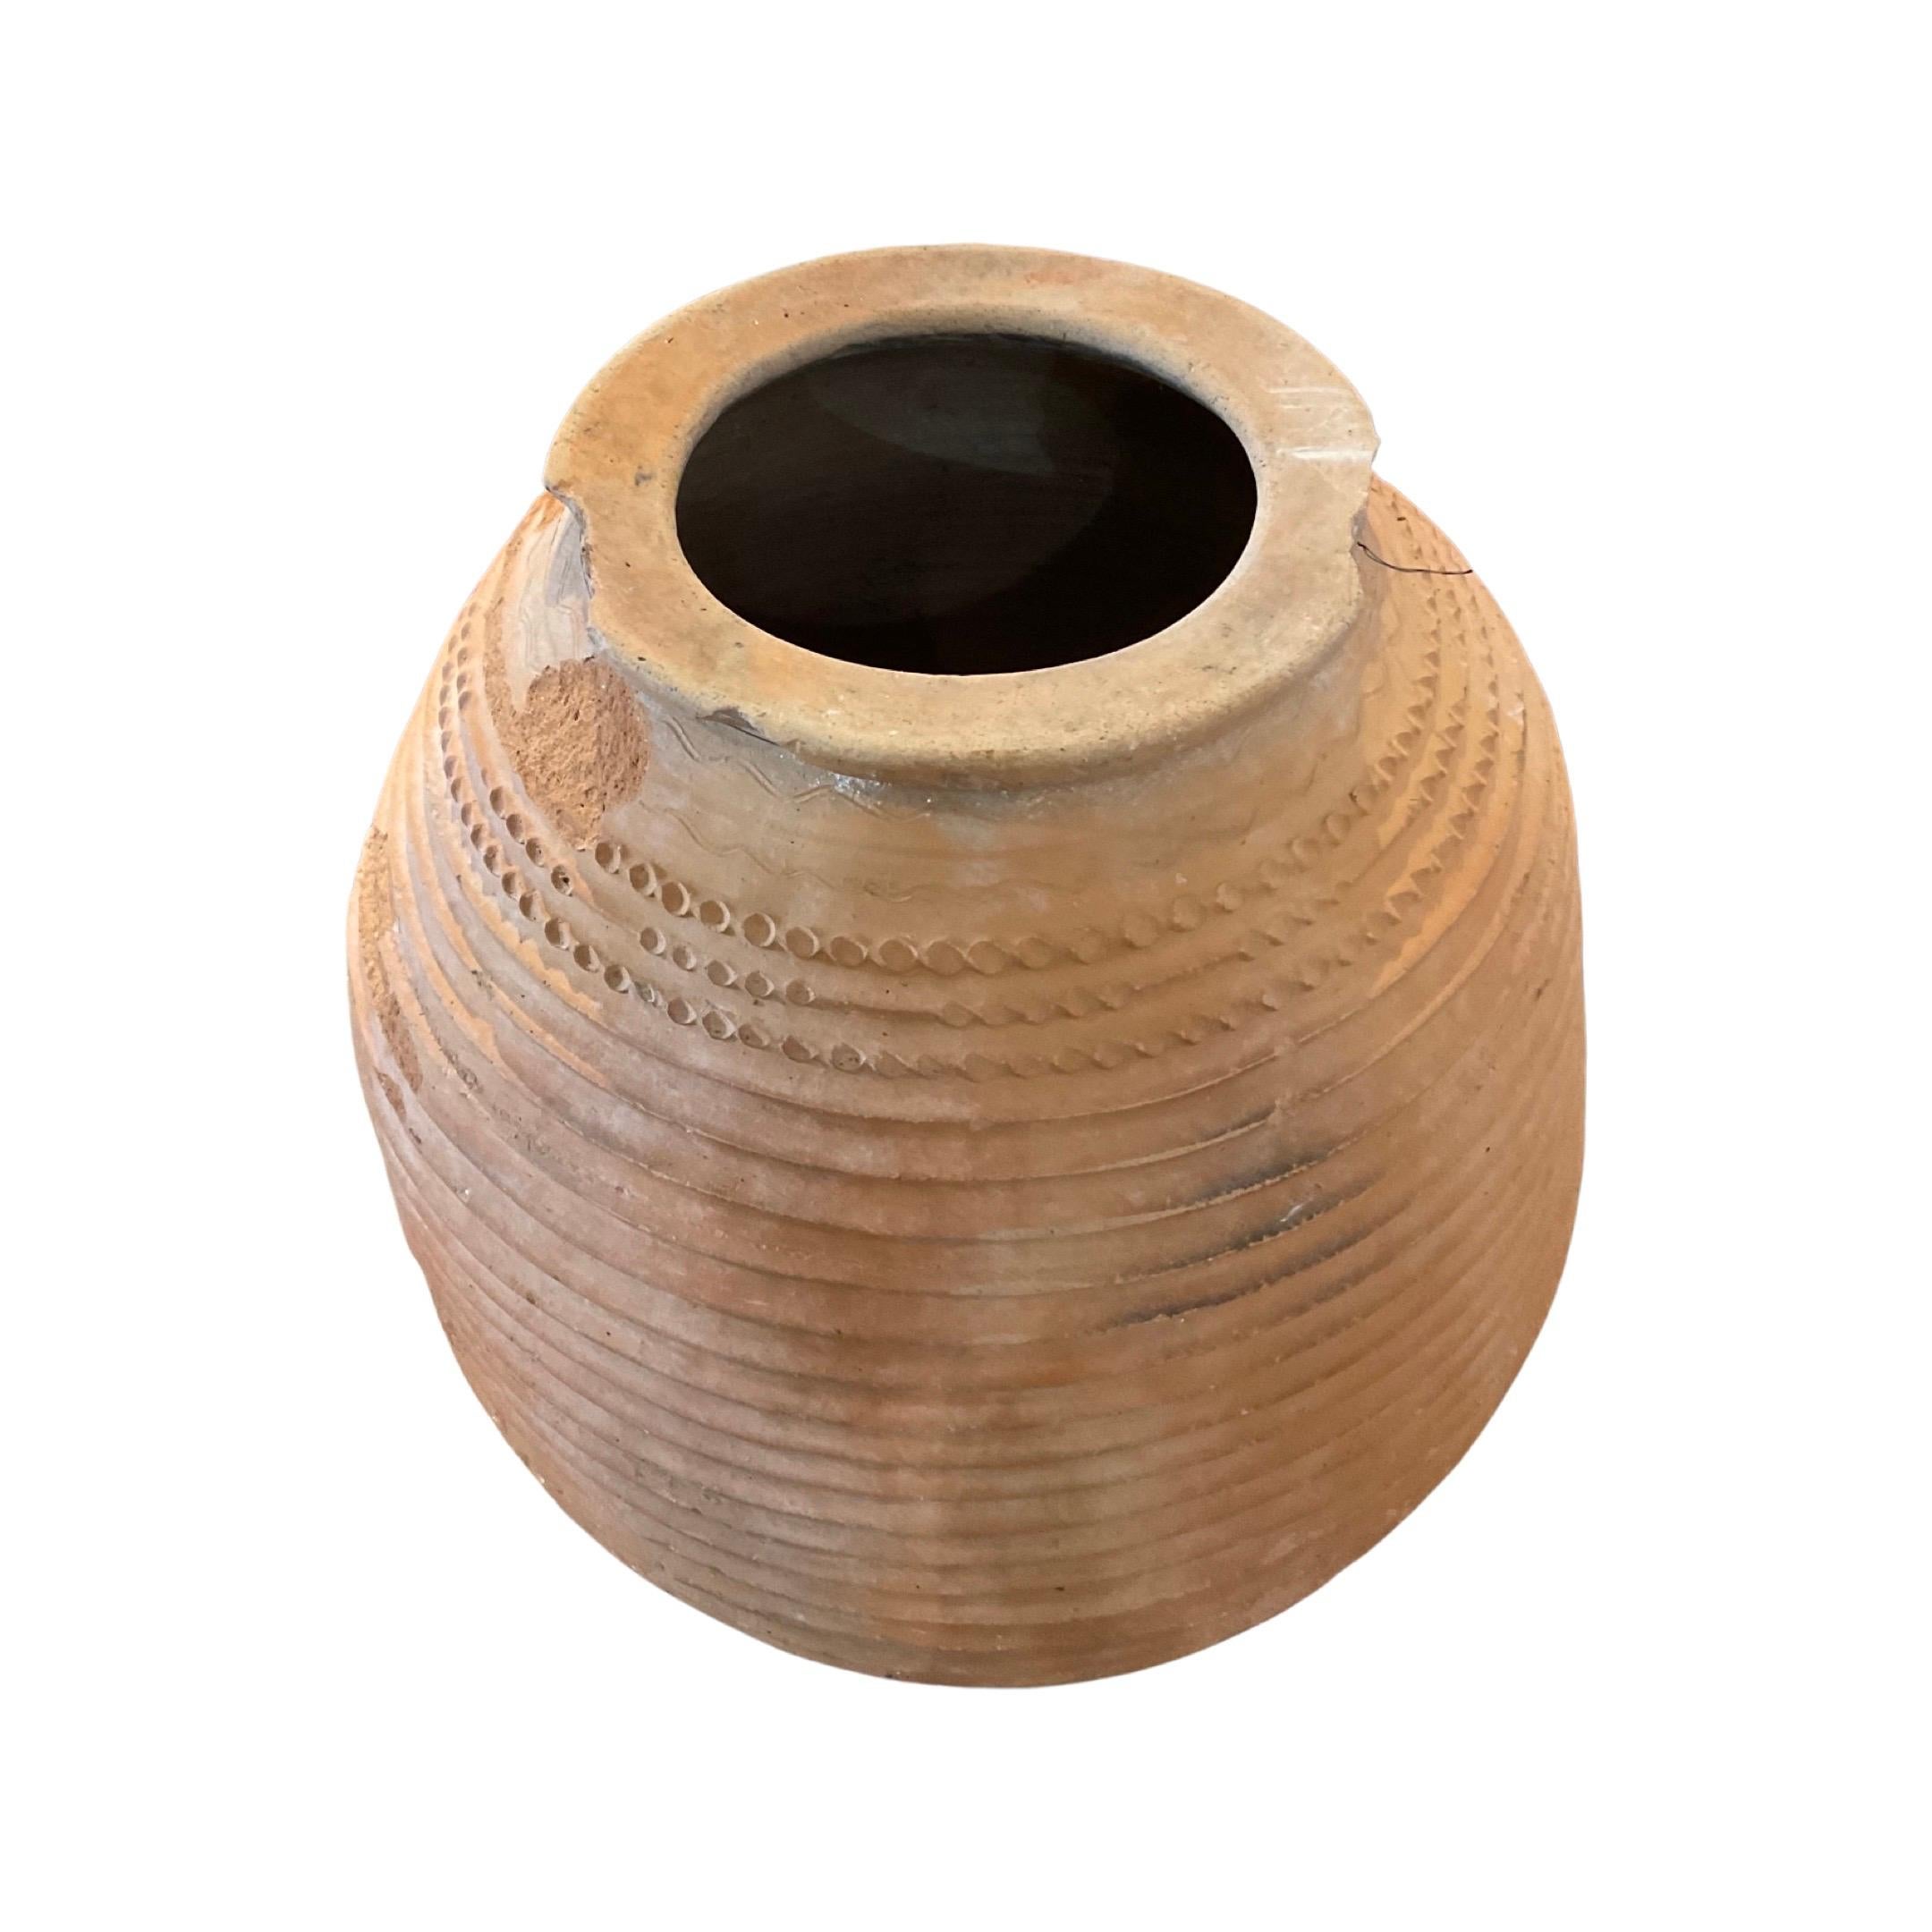 This timeless Greek terracotta planter has been crafted from clay and fired in a kiln to form a Frost-proof, durable construction capable of withstanding outdoor conditions for an indefinite period of time. Dating back to the 18th century, its